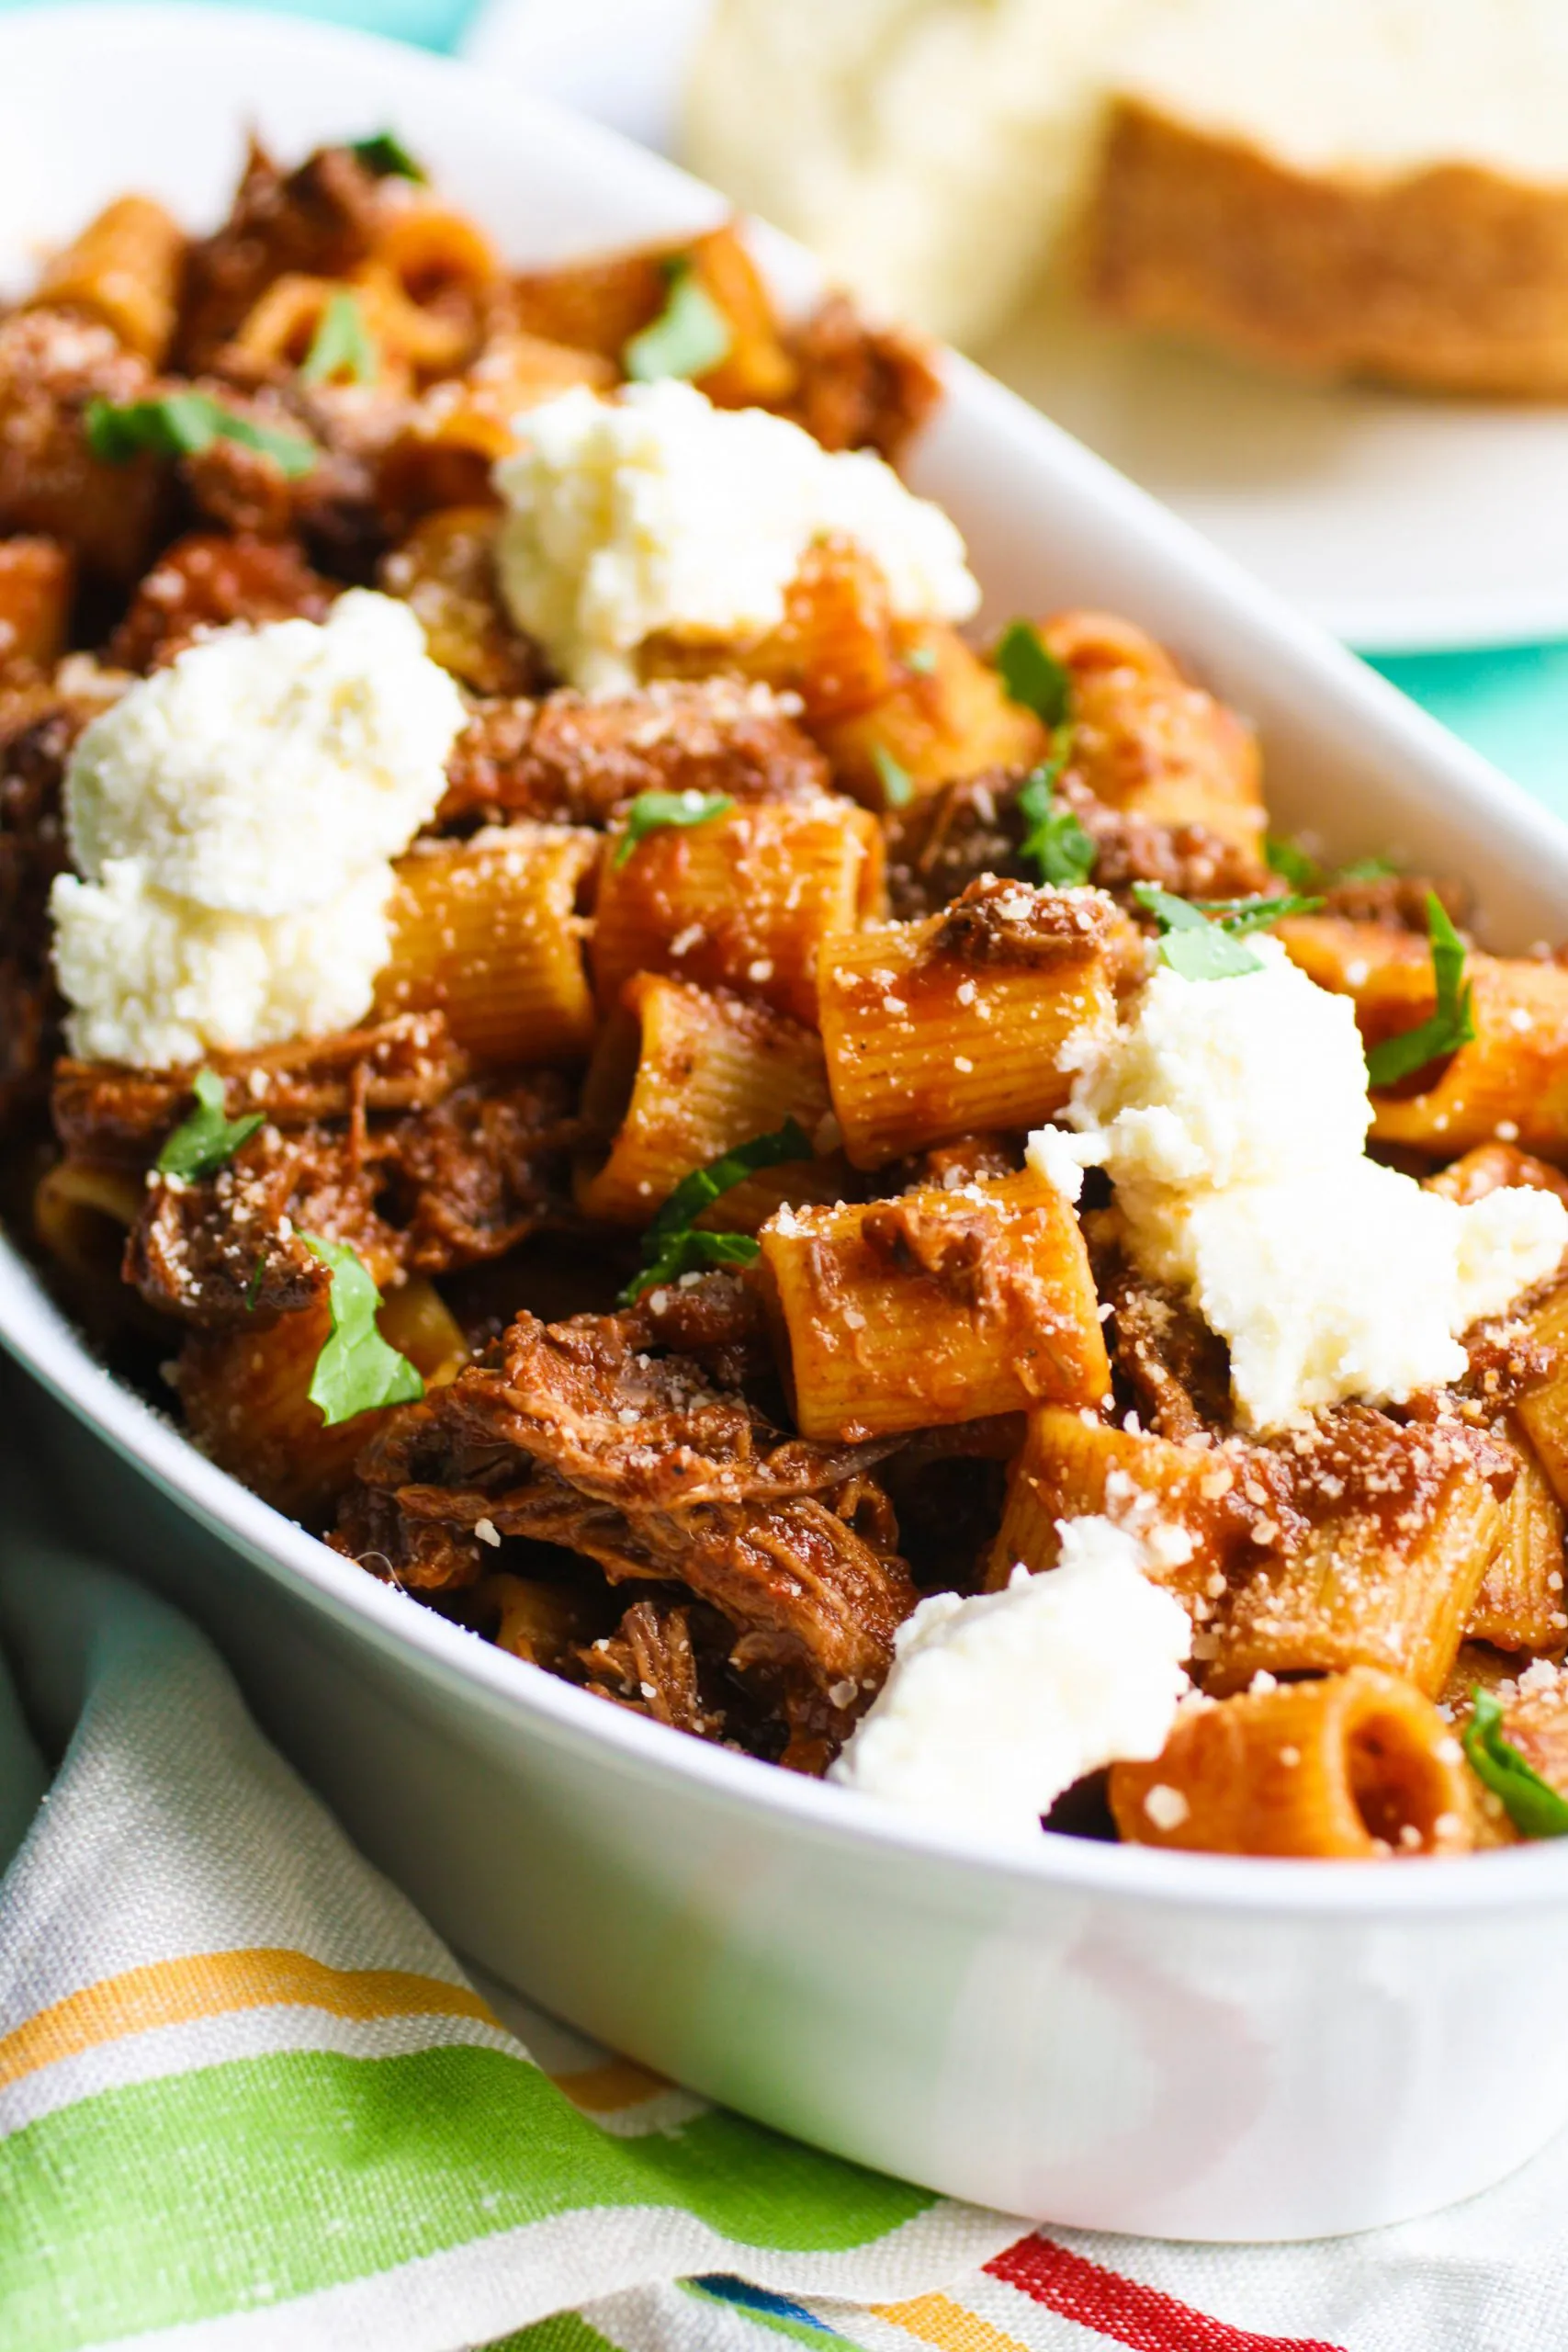 Pasta with short ribs and ricotta is a creamy and delicious dish.